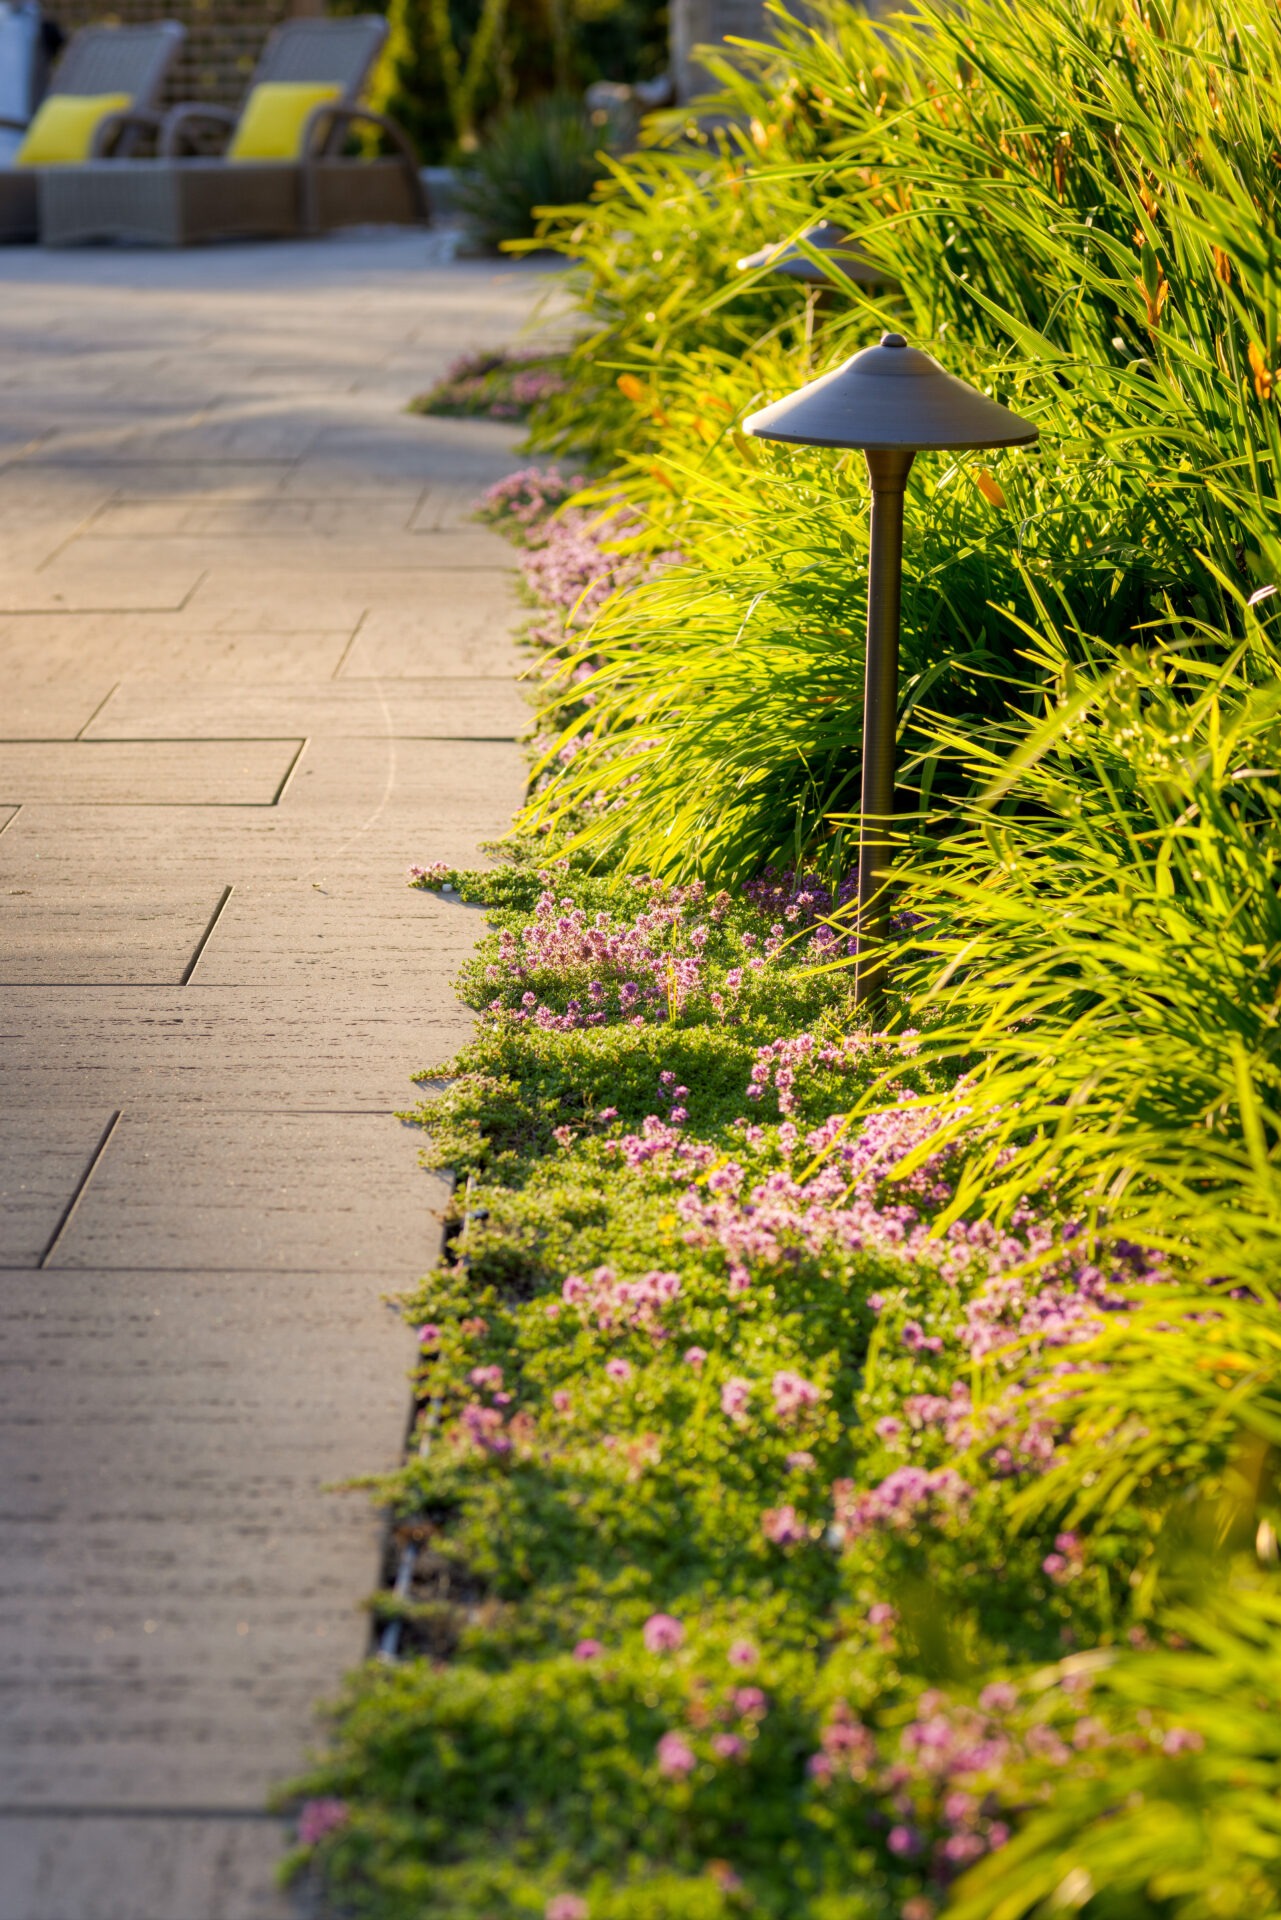 A tranquil garden path lined with lush greenery and pink flowers. Tall grasses sway beside modern, low-profile path lights. Sunlight bathes the scene warmly.